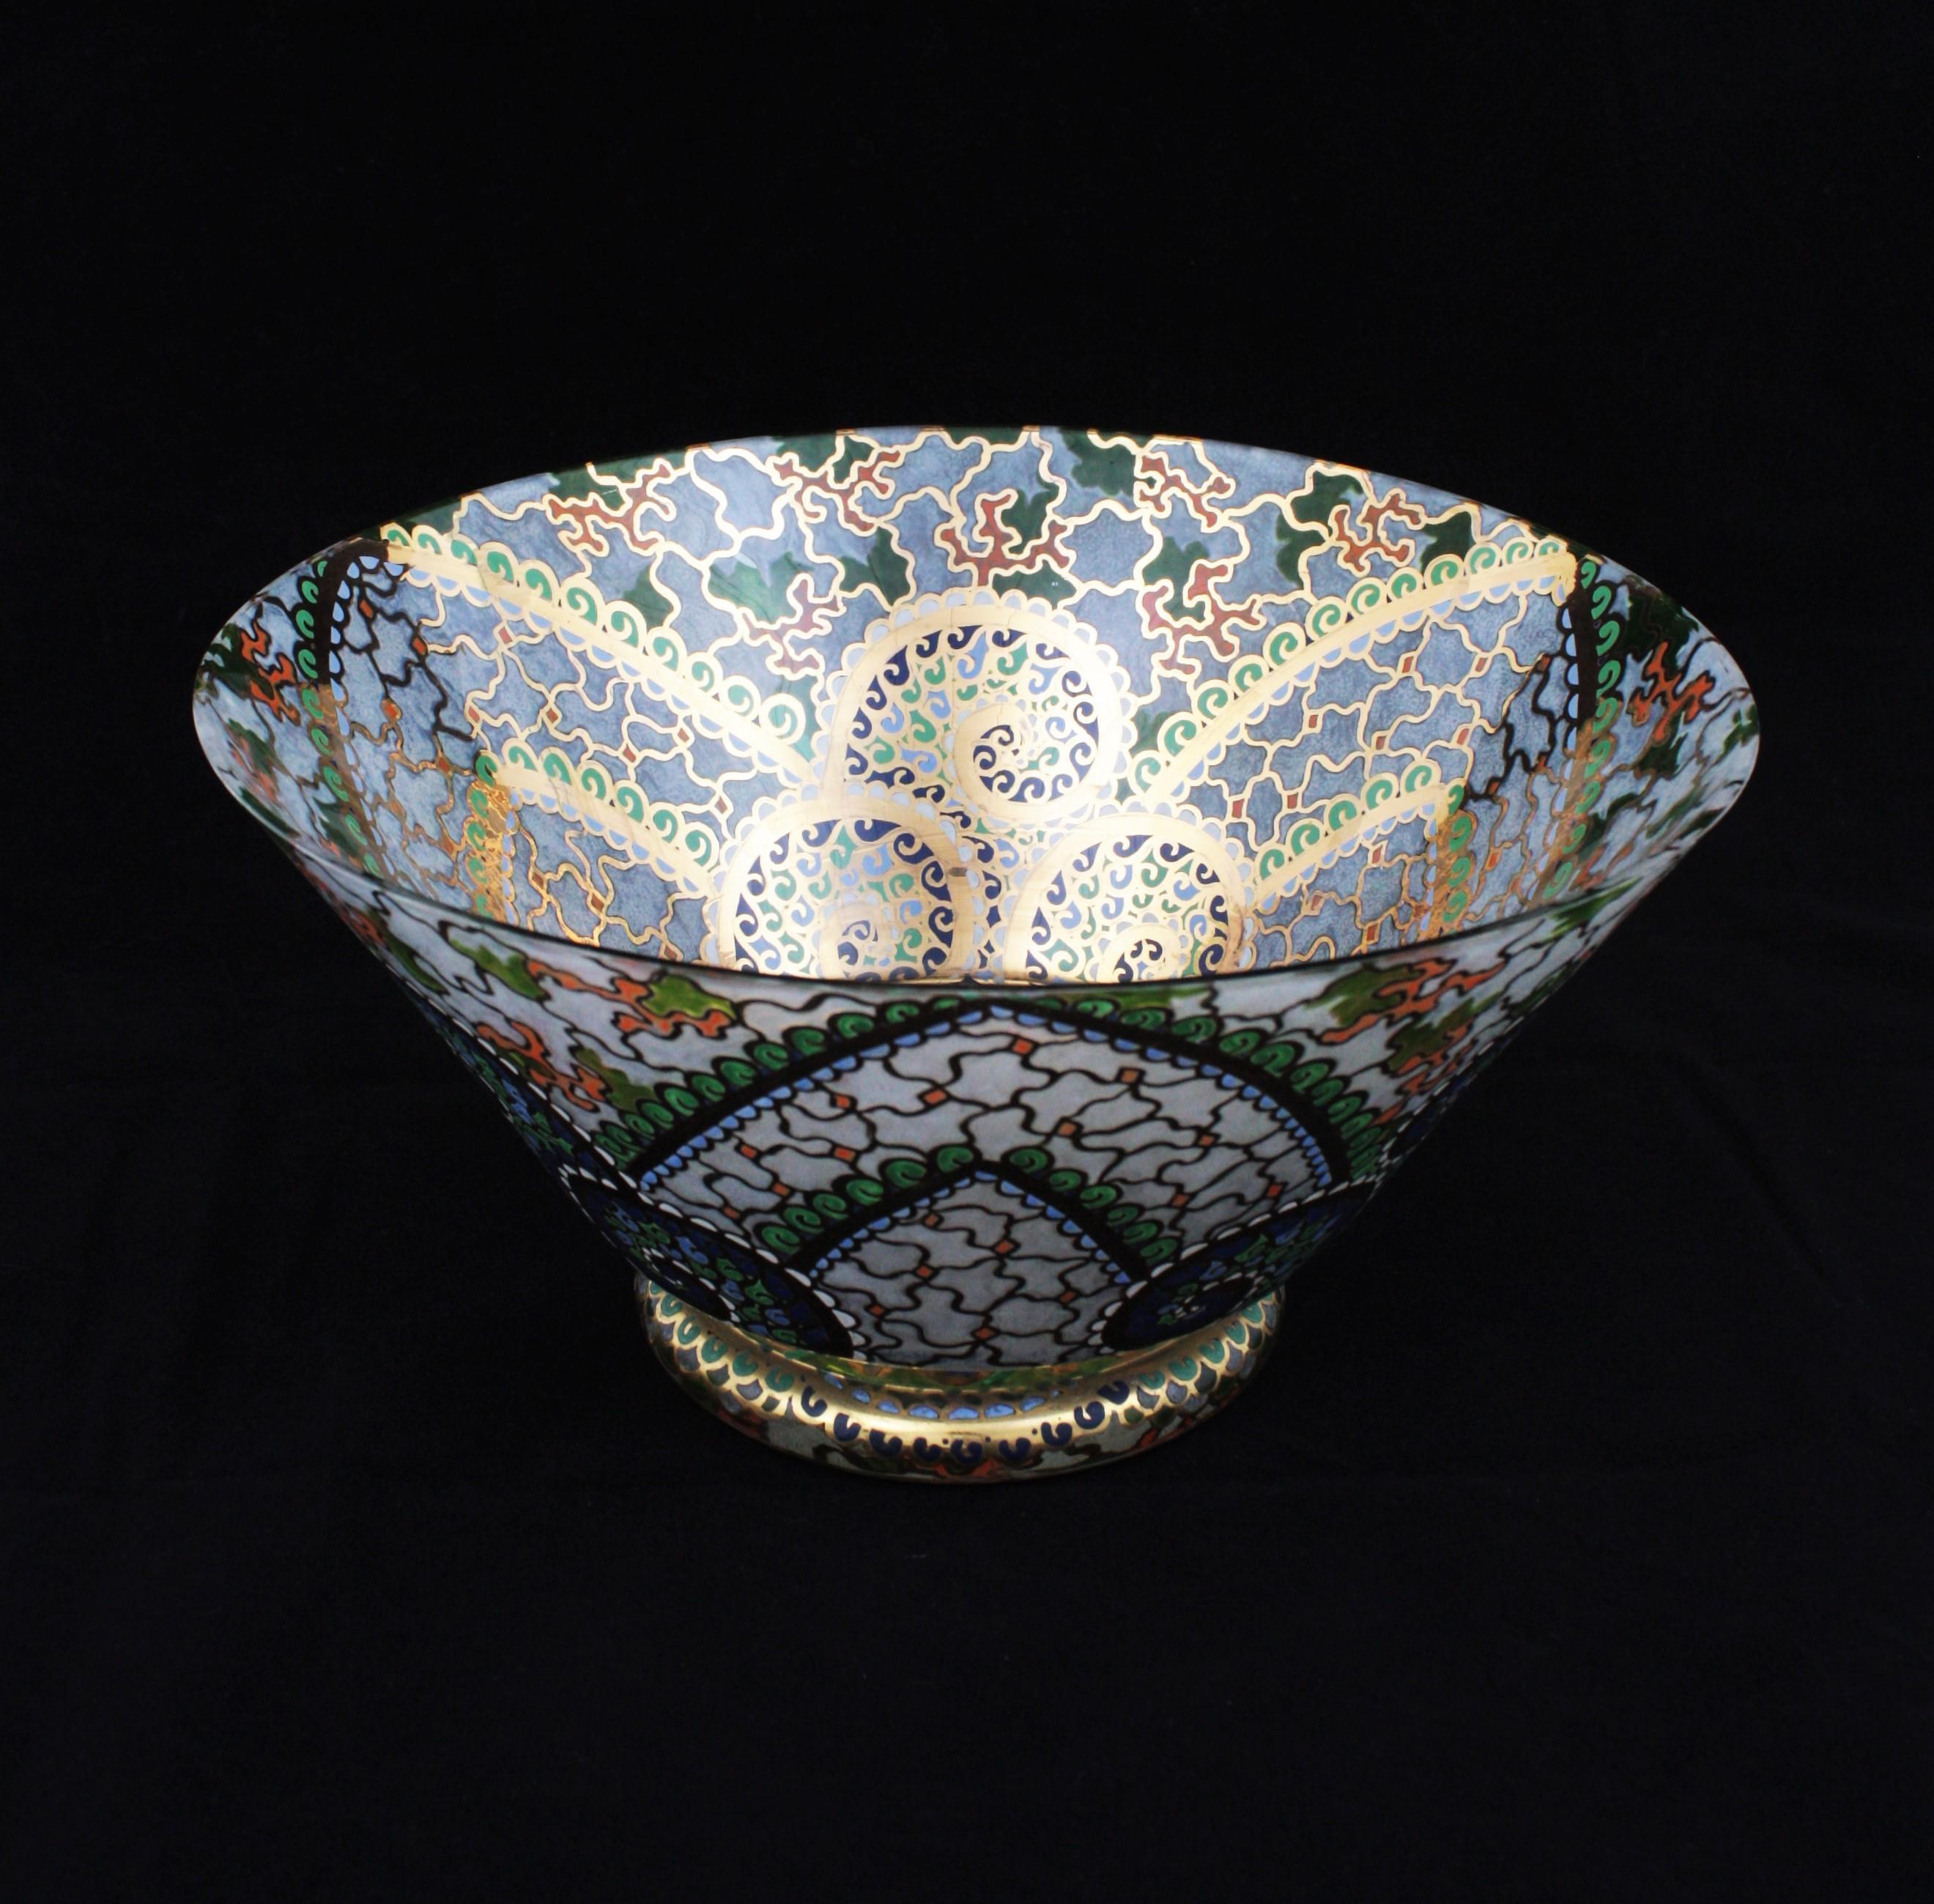 Art Deco Hand Painted Enameled Polychrome & Gold Glass Centerpiece Bowl by Riera 5